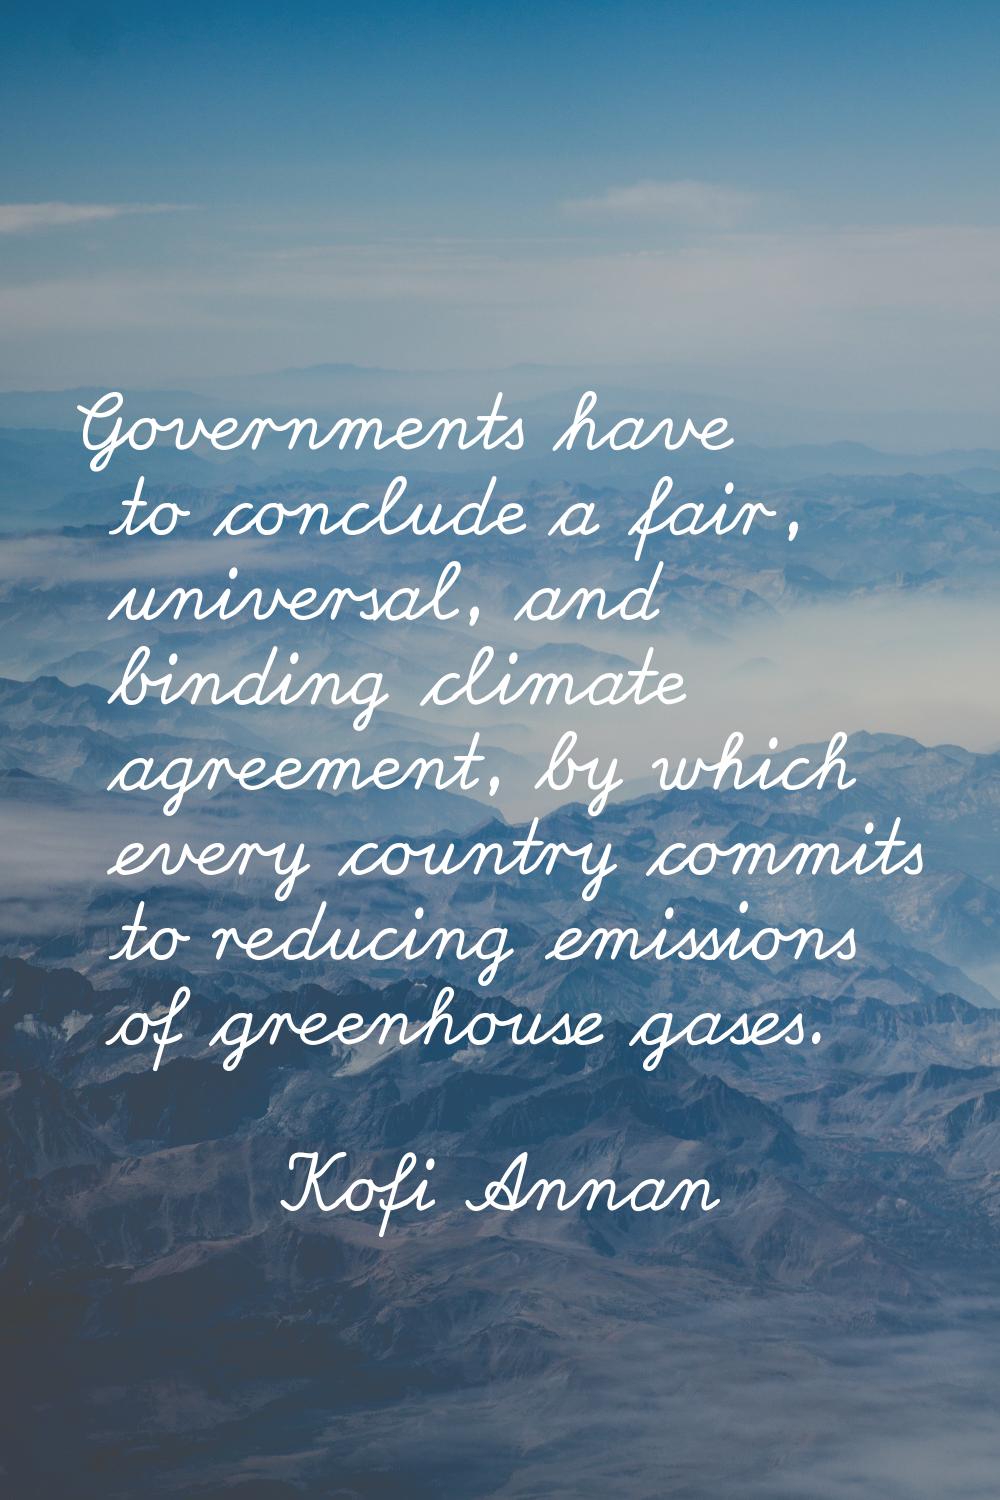 Governments have to conclude a fair, universal, and binding climate agreement, by which every count